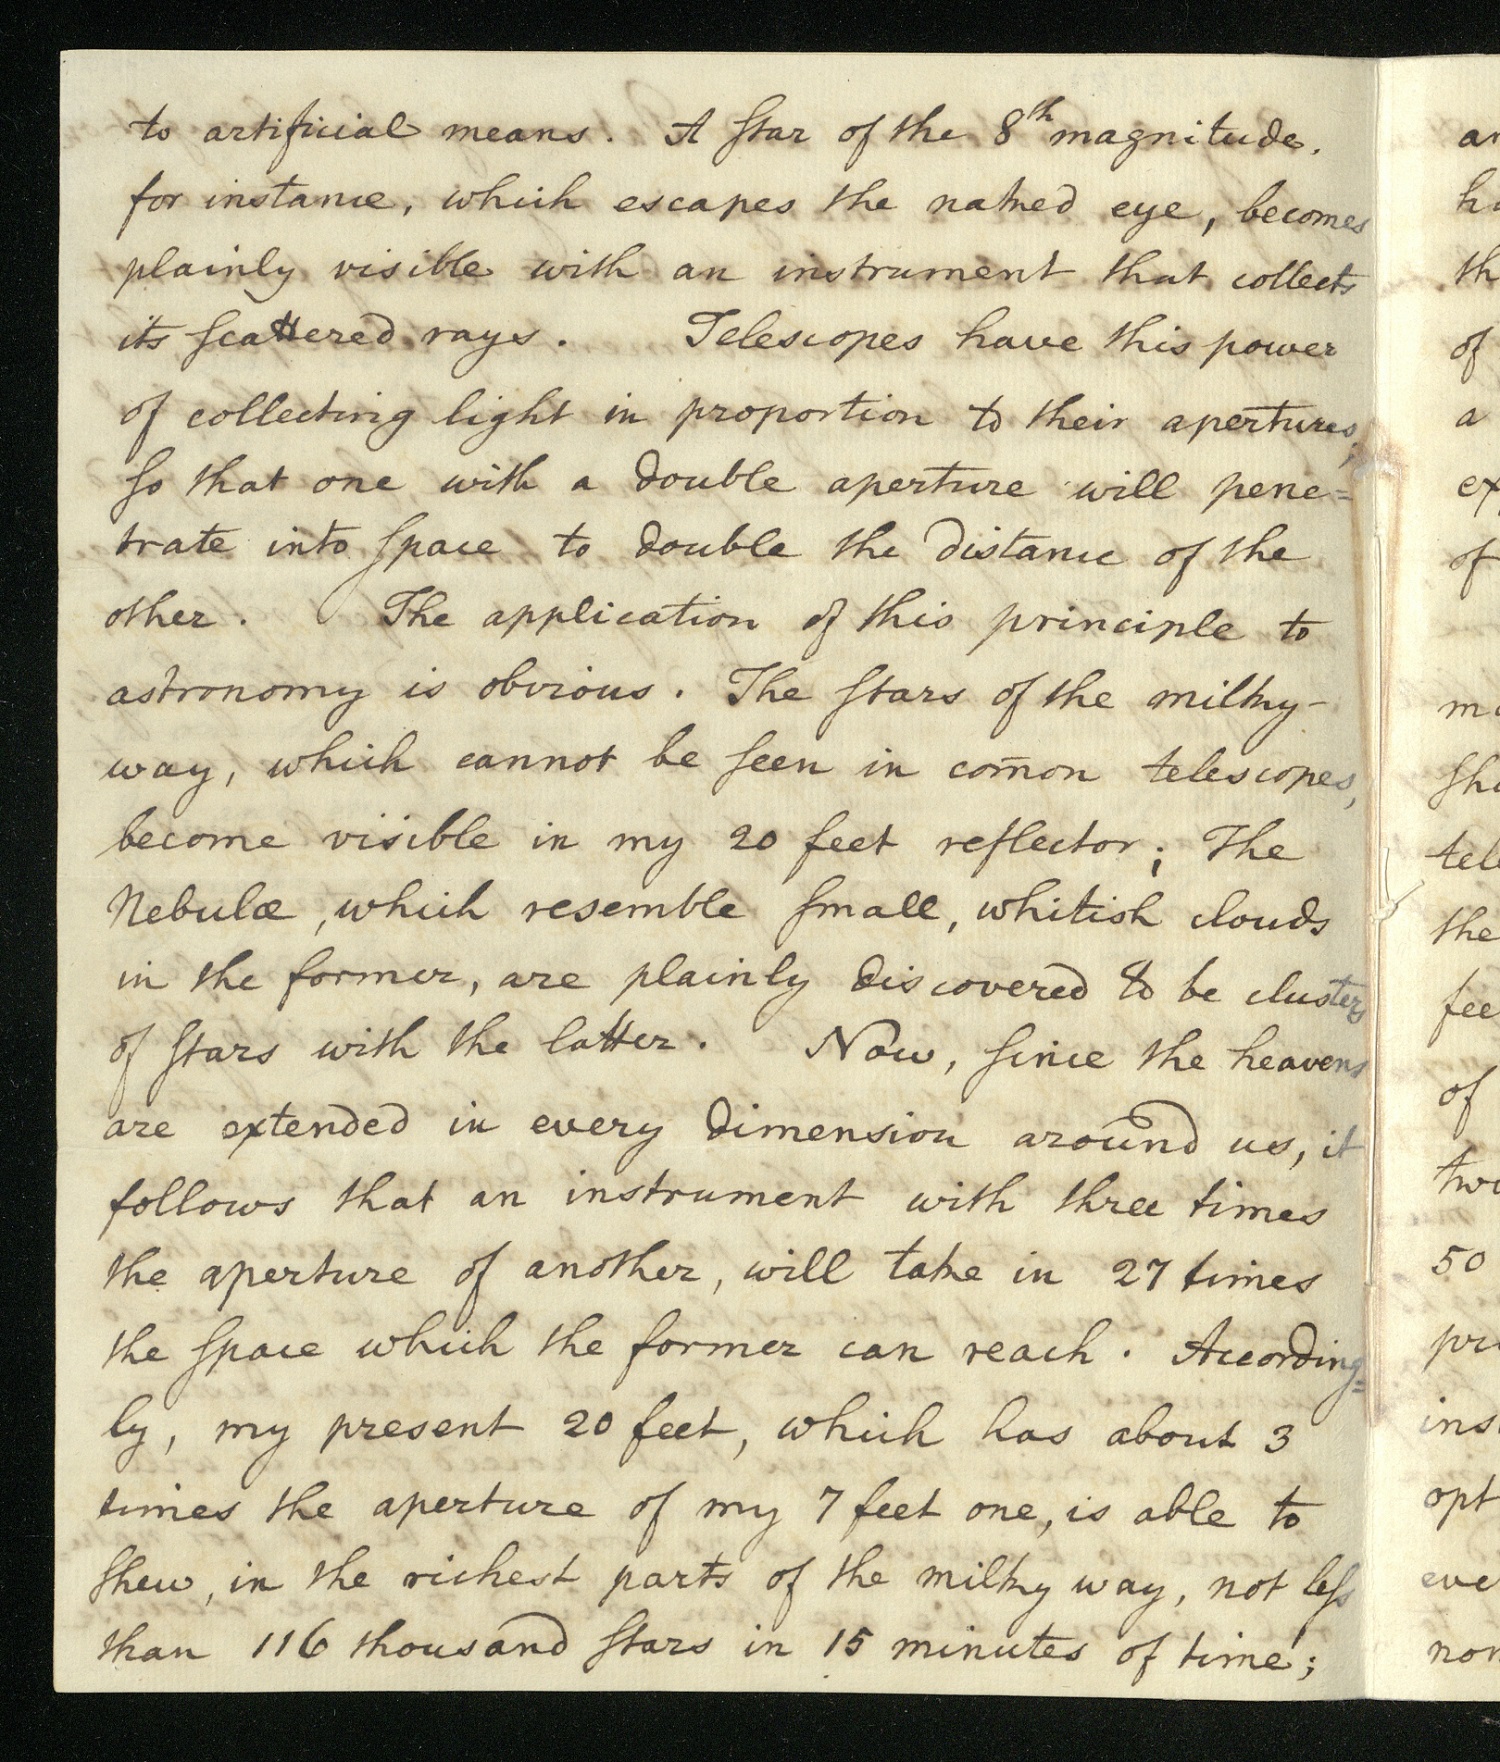 Letter from William Herschel to Sir Joseph Banks, with an estimate of the expenses required to build an enlarged telescope, page 4